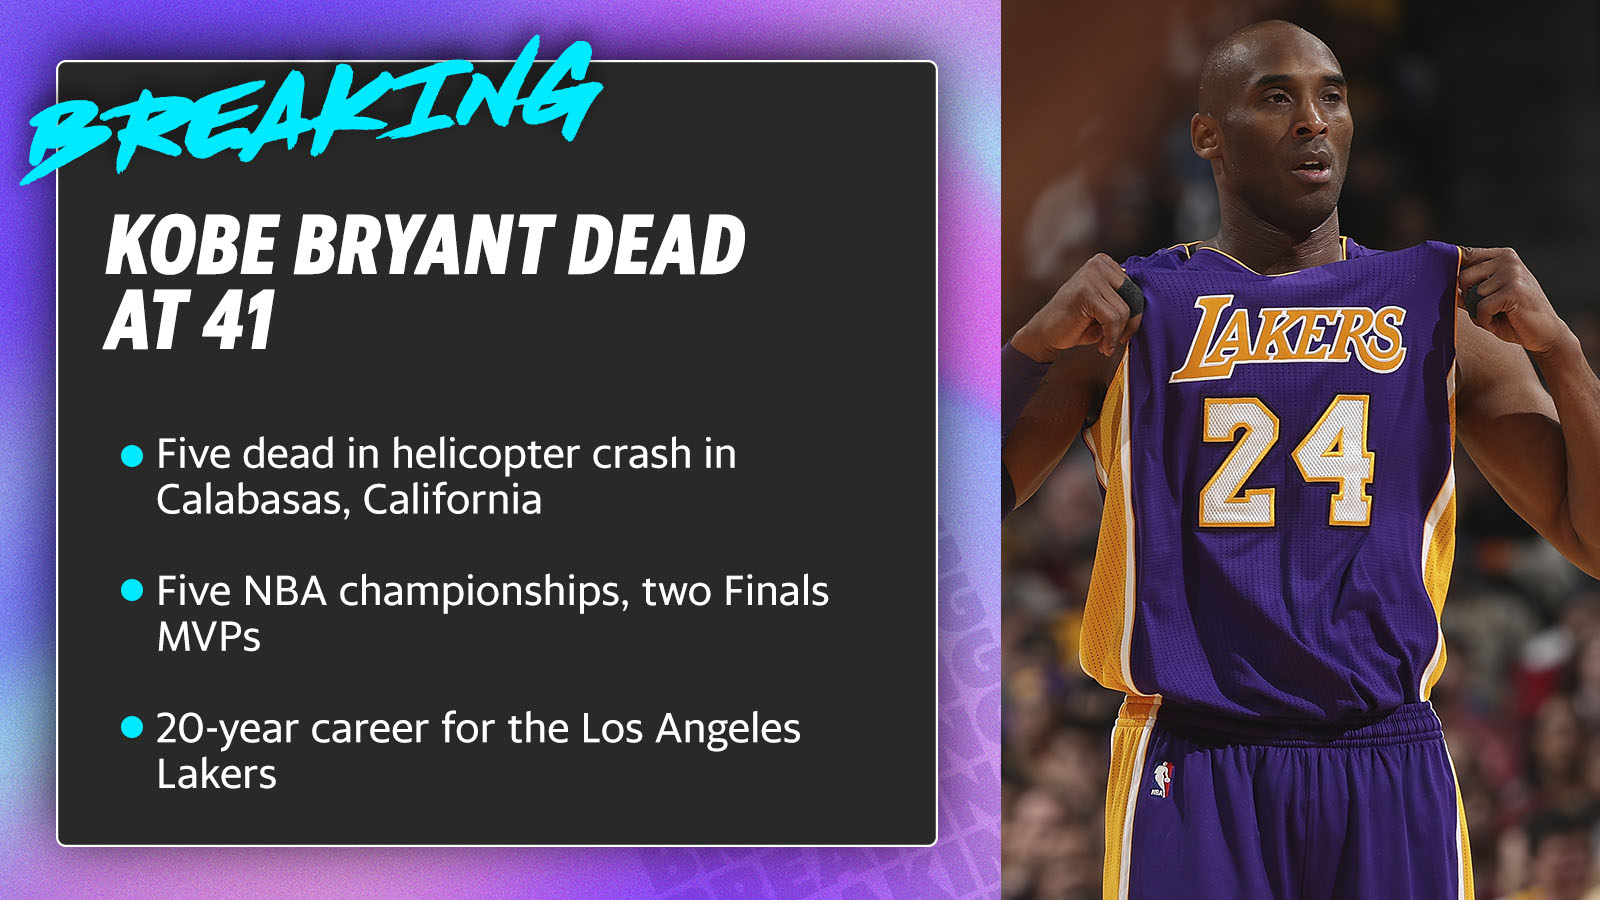 Kobe Bryant Dead In Helicopter Crash At 41